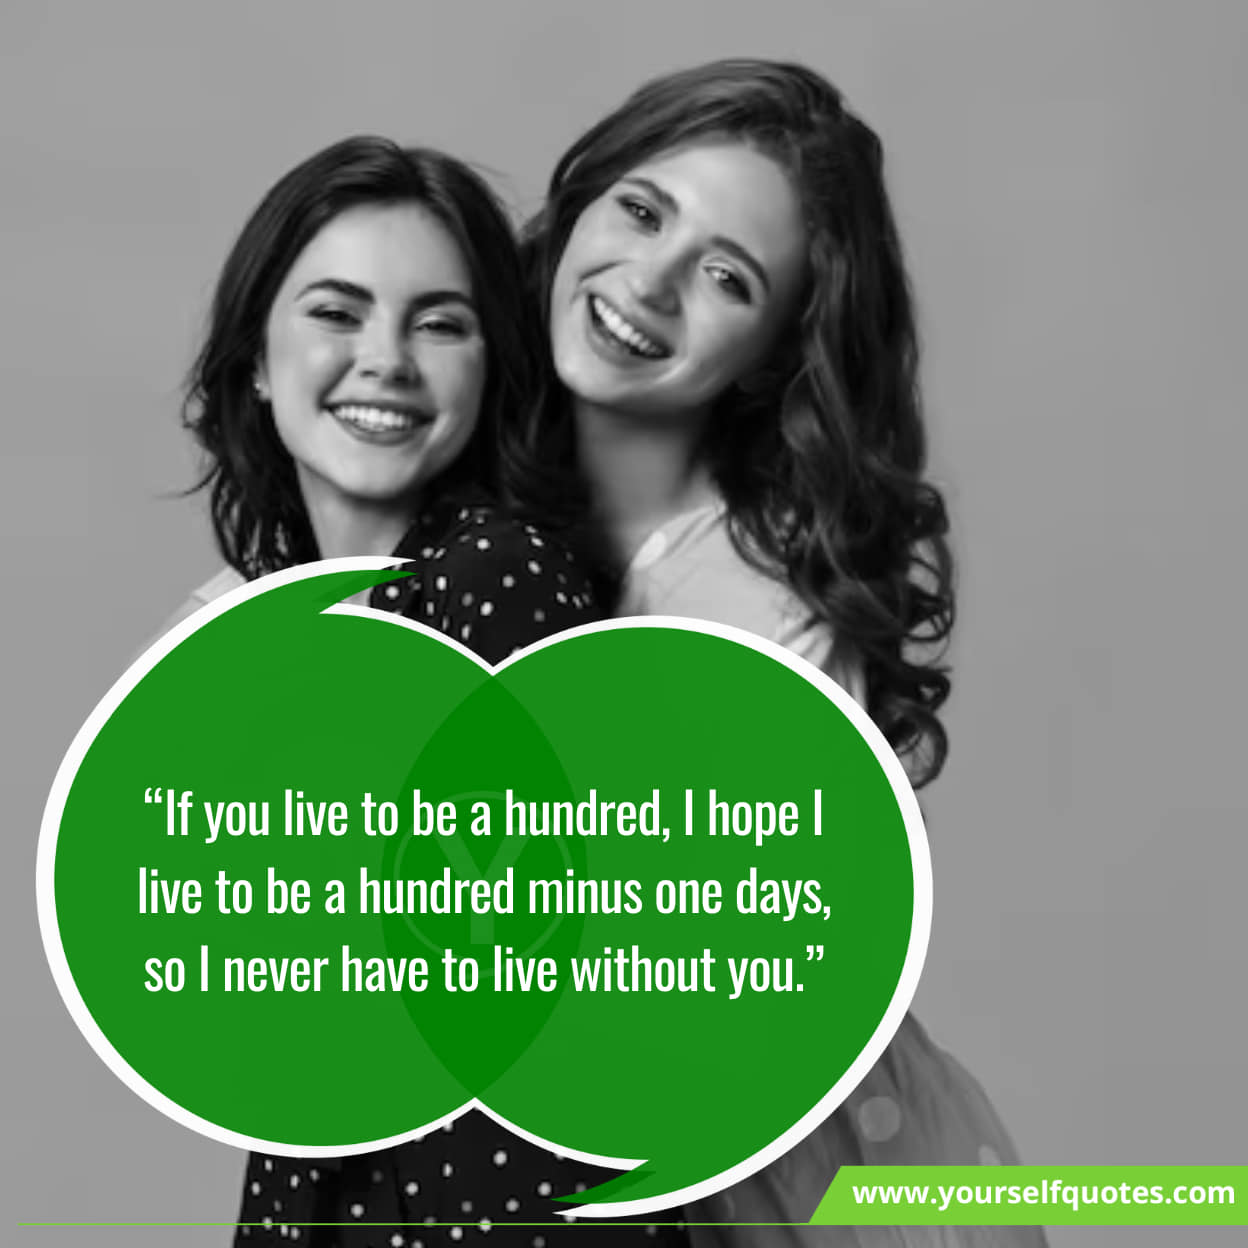 Quotes on the importance of friendship